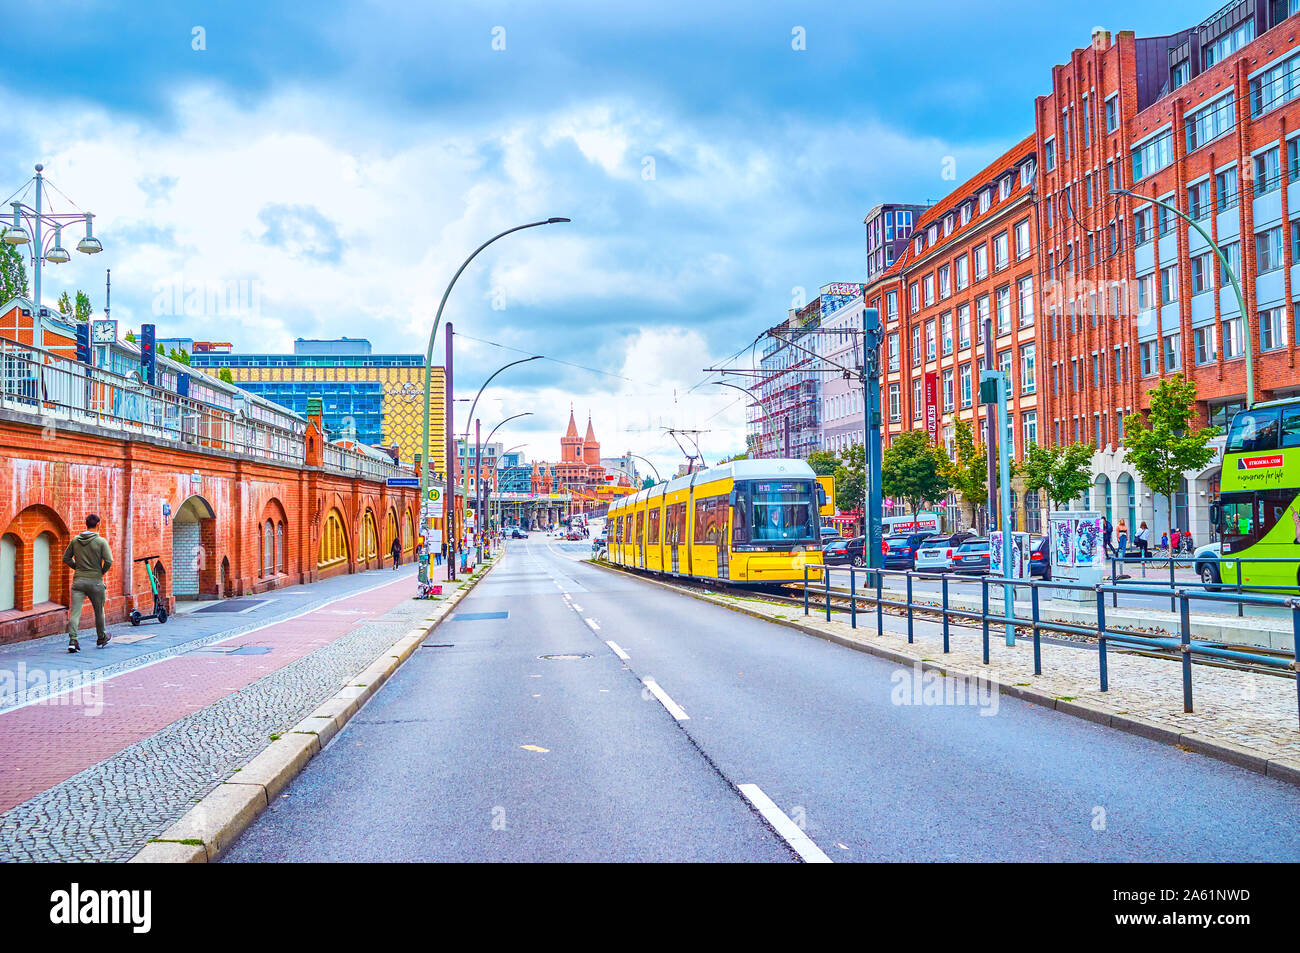 BERLIN, GERMANY - OCTOBER 3, 2019: The urban scene with modern yellow tram, ridding along the Warschauer Strasse in central Berlin, on October 3 in Be Stock Photo